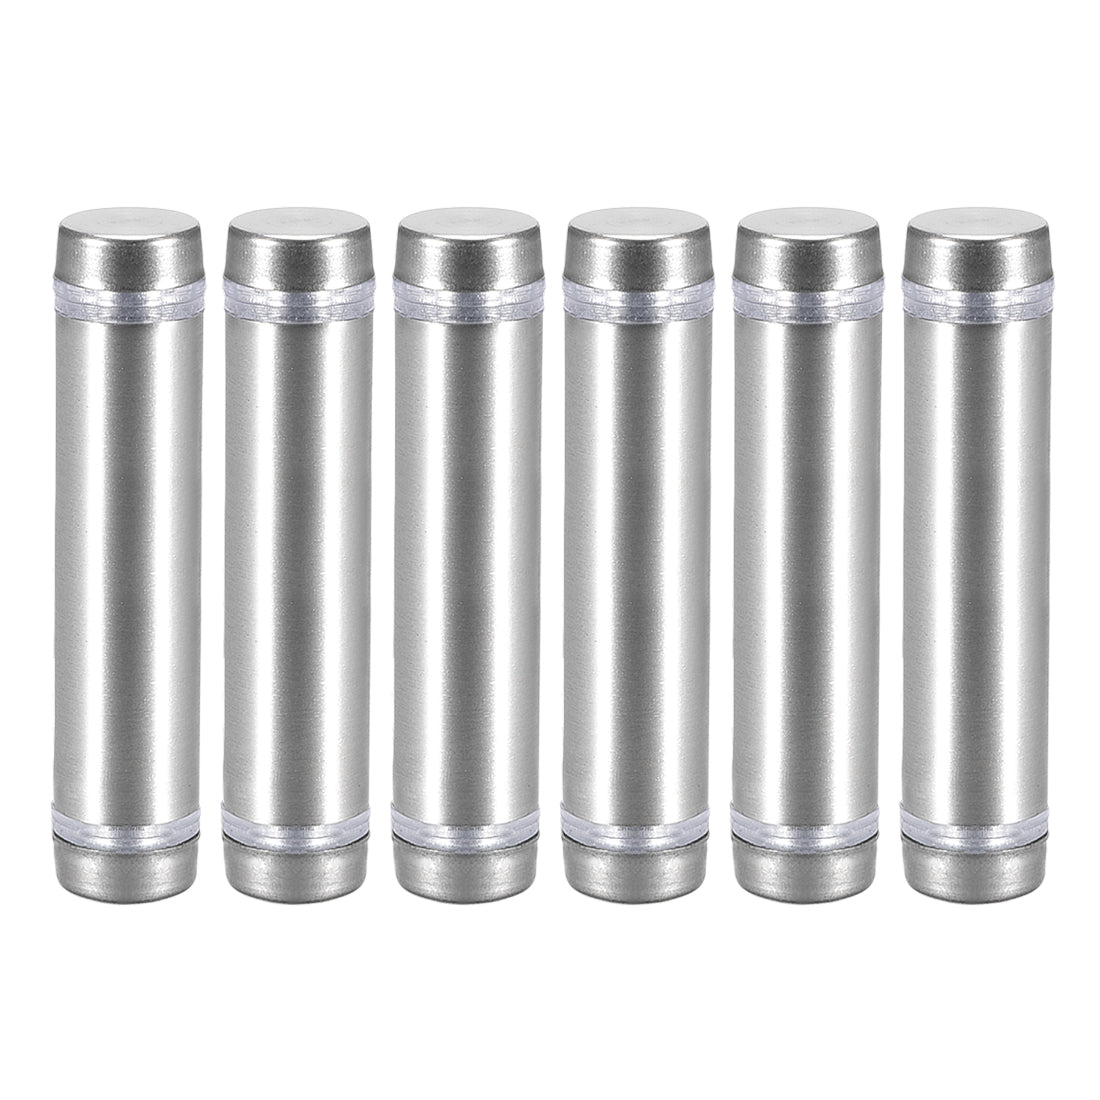 uxcell Uxcell Glass Standoff Double Head Stainless Steel Standoff Holder 12mm x 54mm 6 Pcs